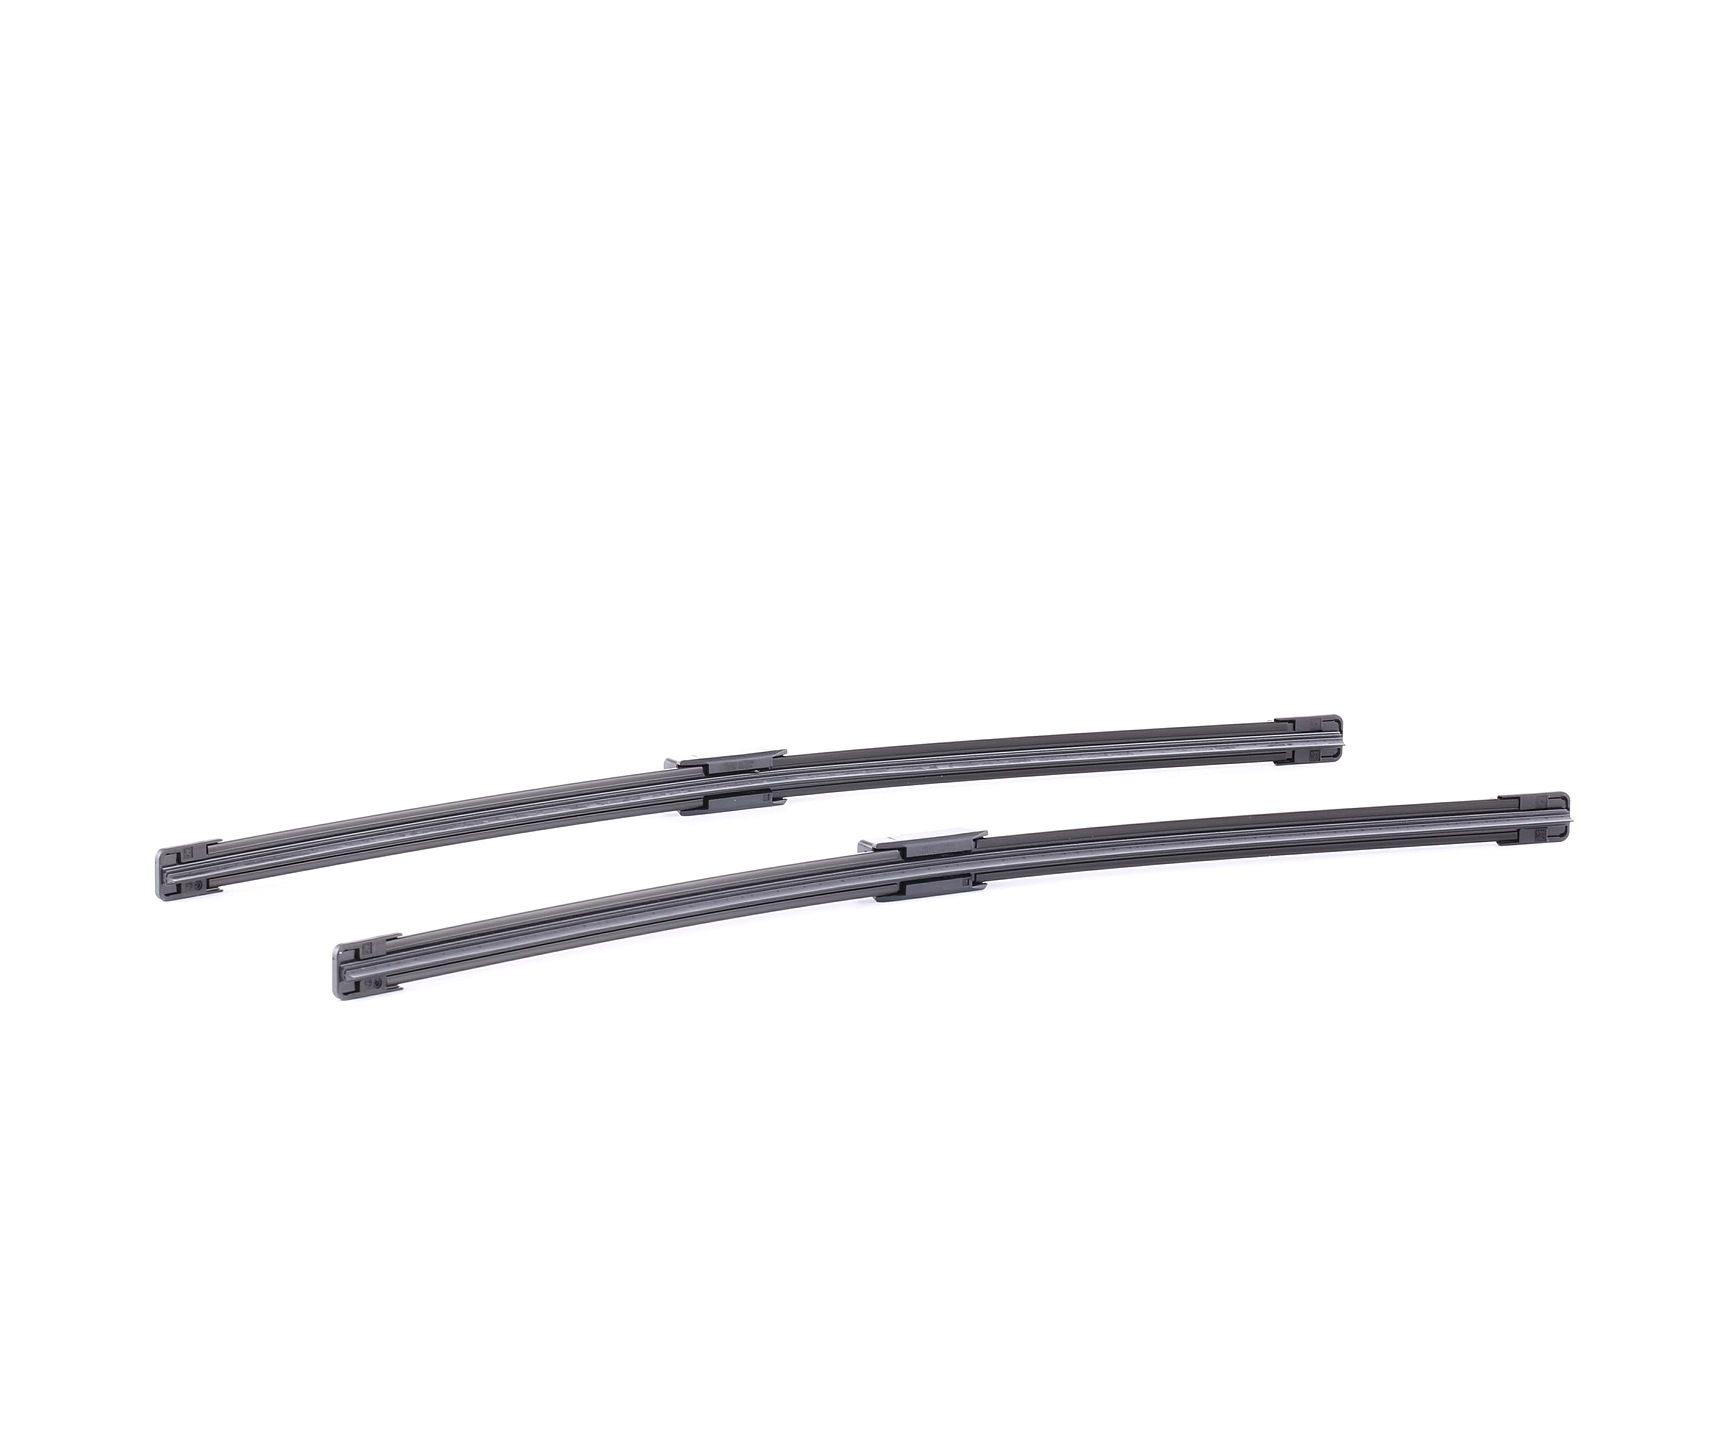 A 923 S BOSCH 530 mm, Beam, for left-hand drive vehicles Left-/right-hand drive vehicles: for left-hand drive vehicles Wiper blades 3 397 118 923 buy